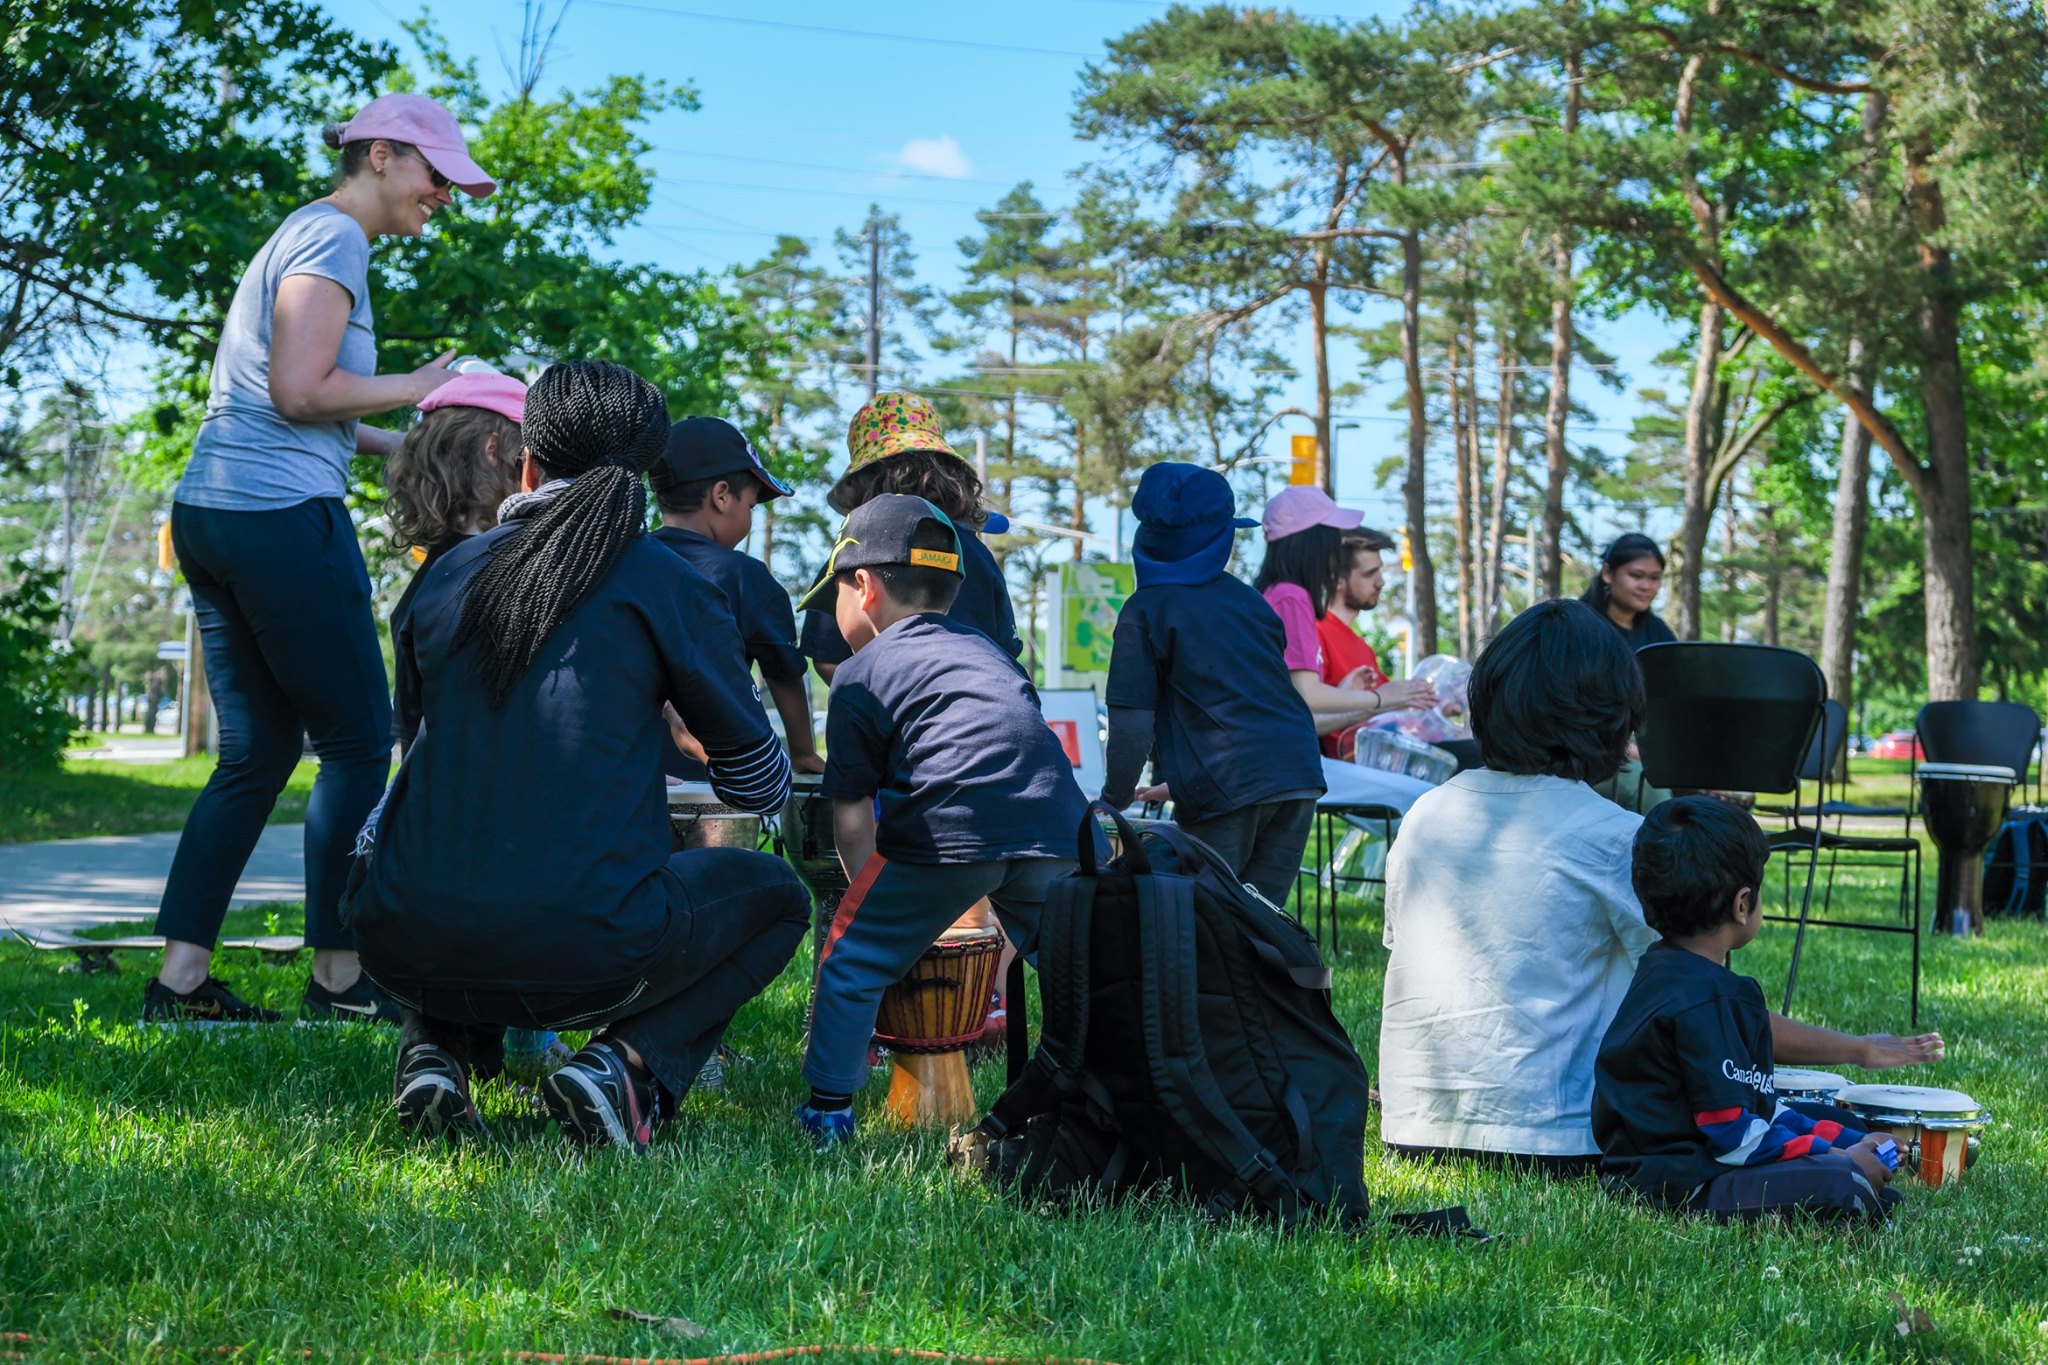 Participants siting on the grass playing various percussion instruments